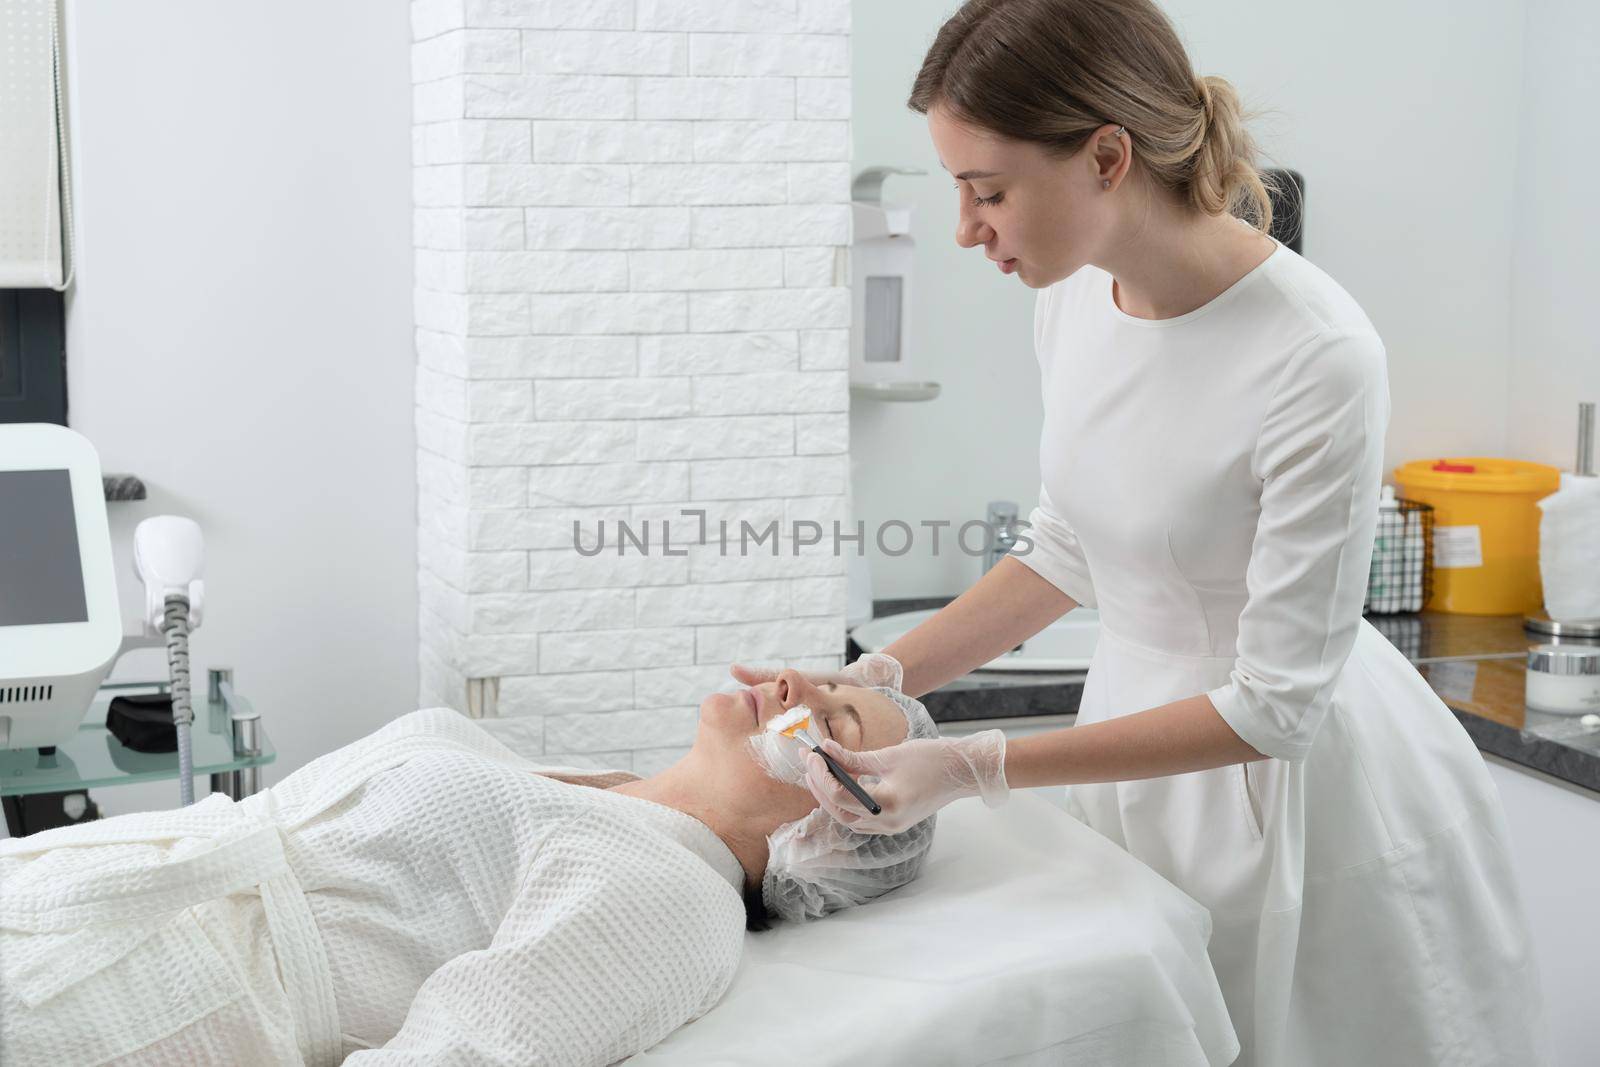 Mature woman receiving wwhte facial mask in spa beauty salon. Concept of skin care for older people by Mariakray